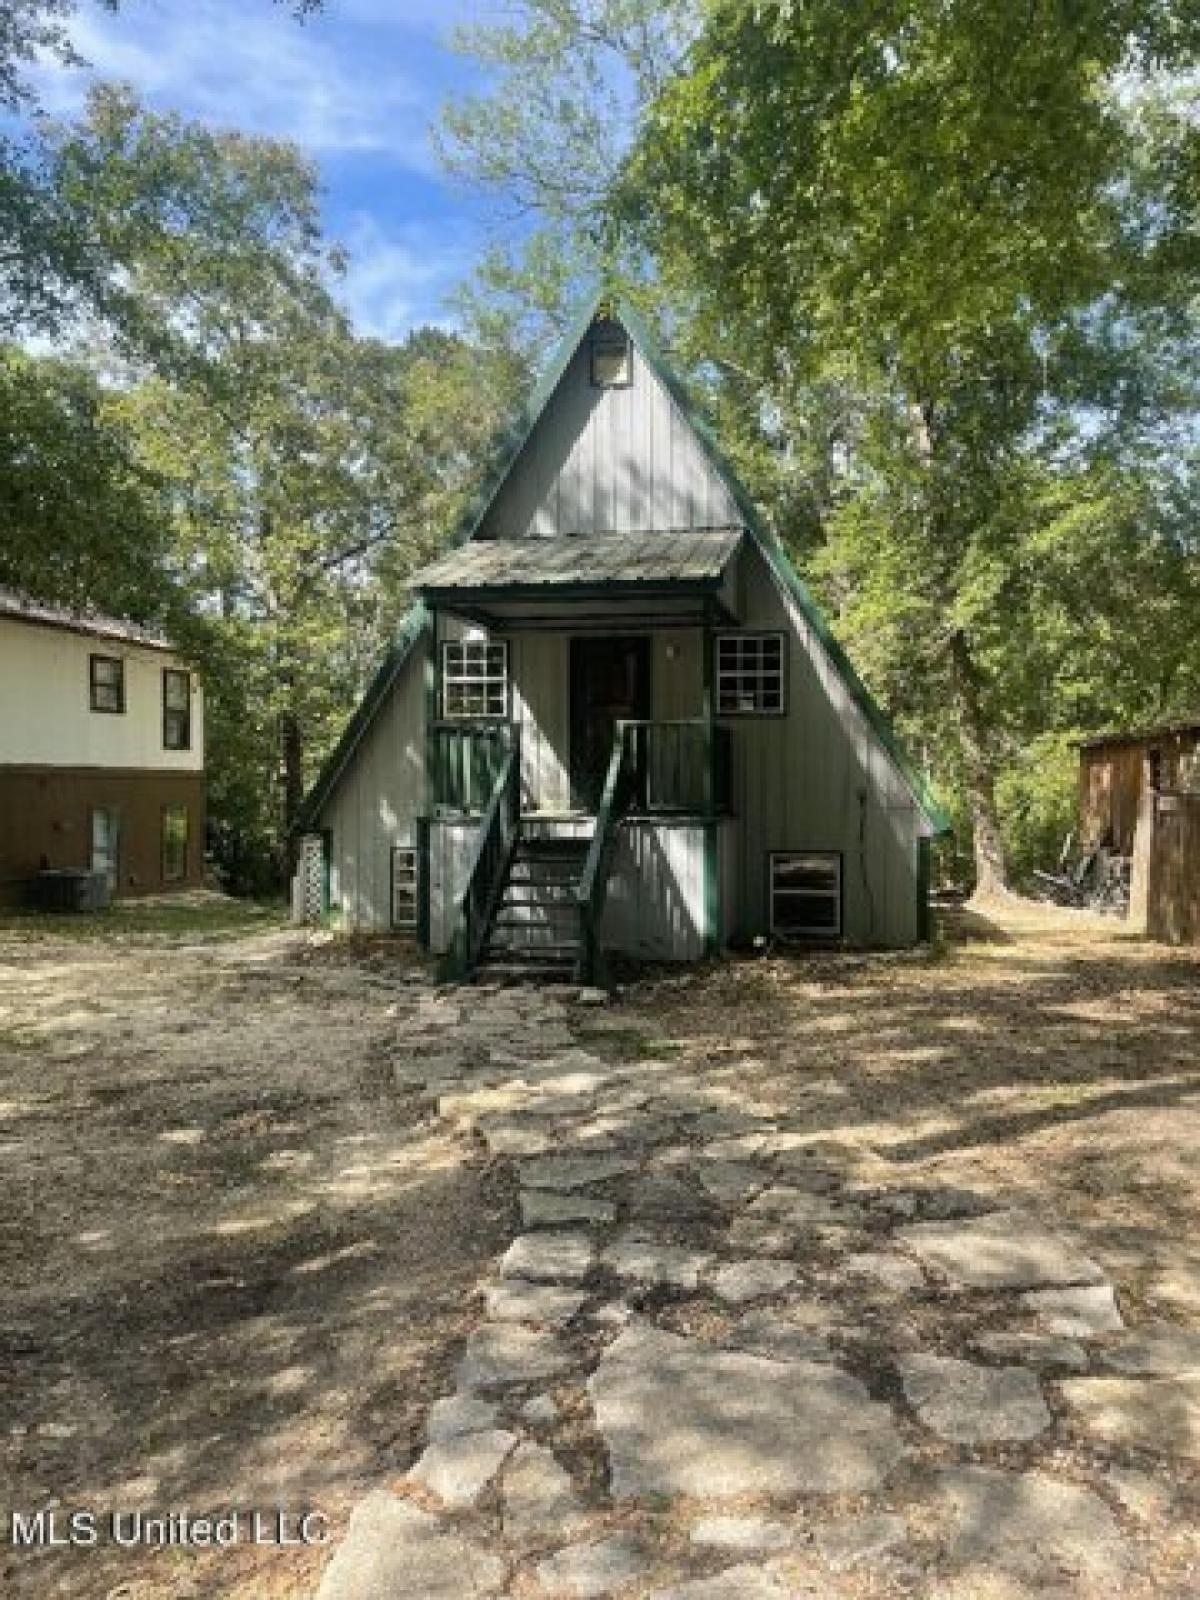 Picture of Home For Sale in Gautier, Mississippi, United States